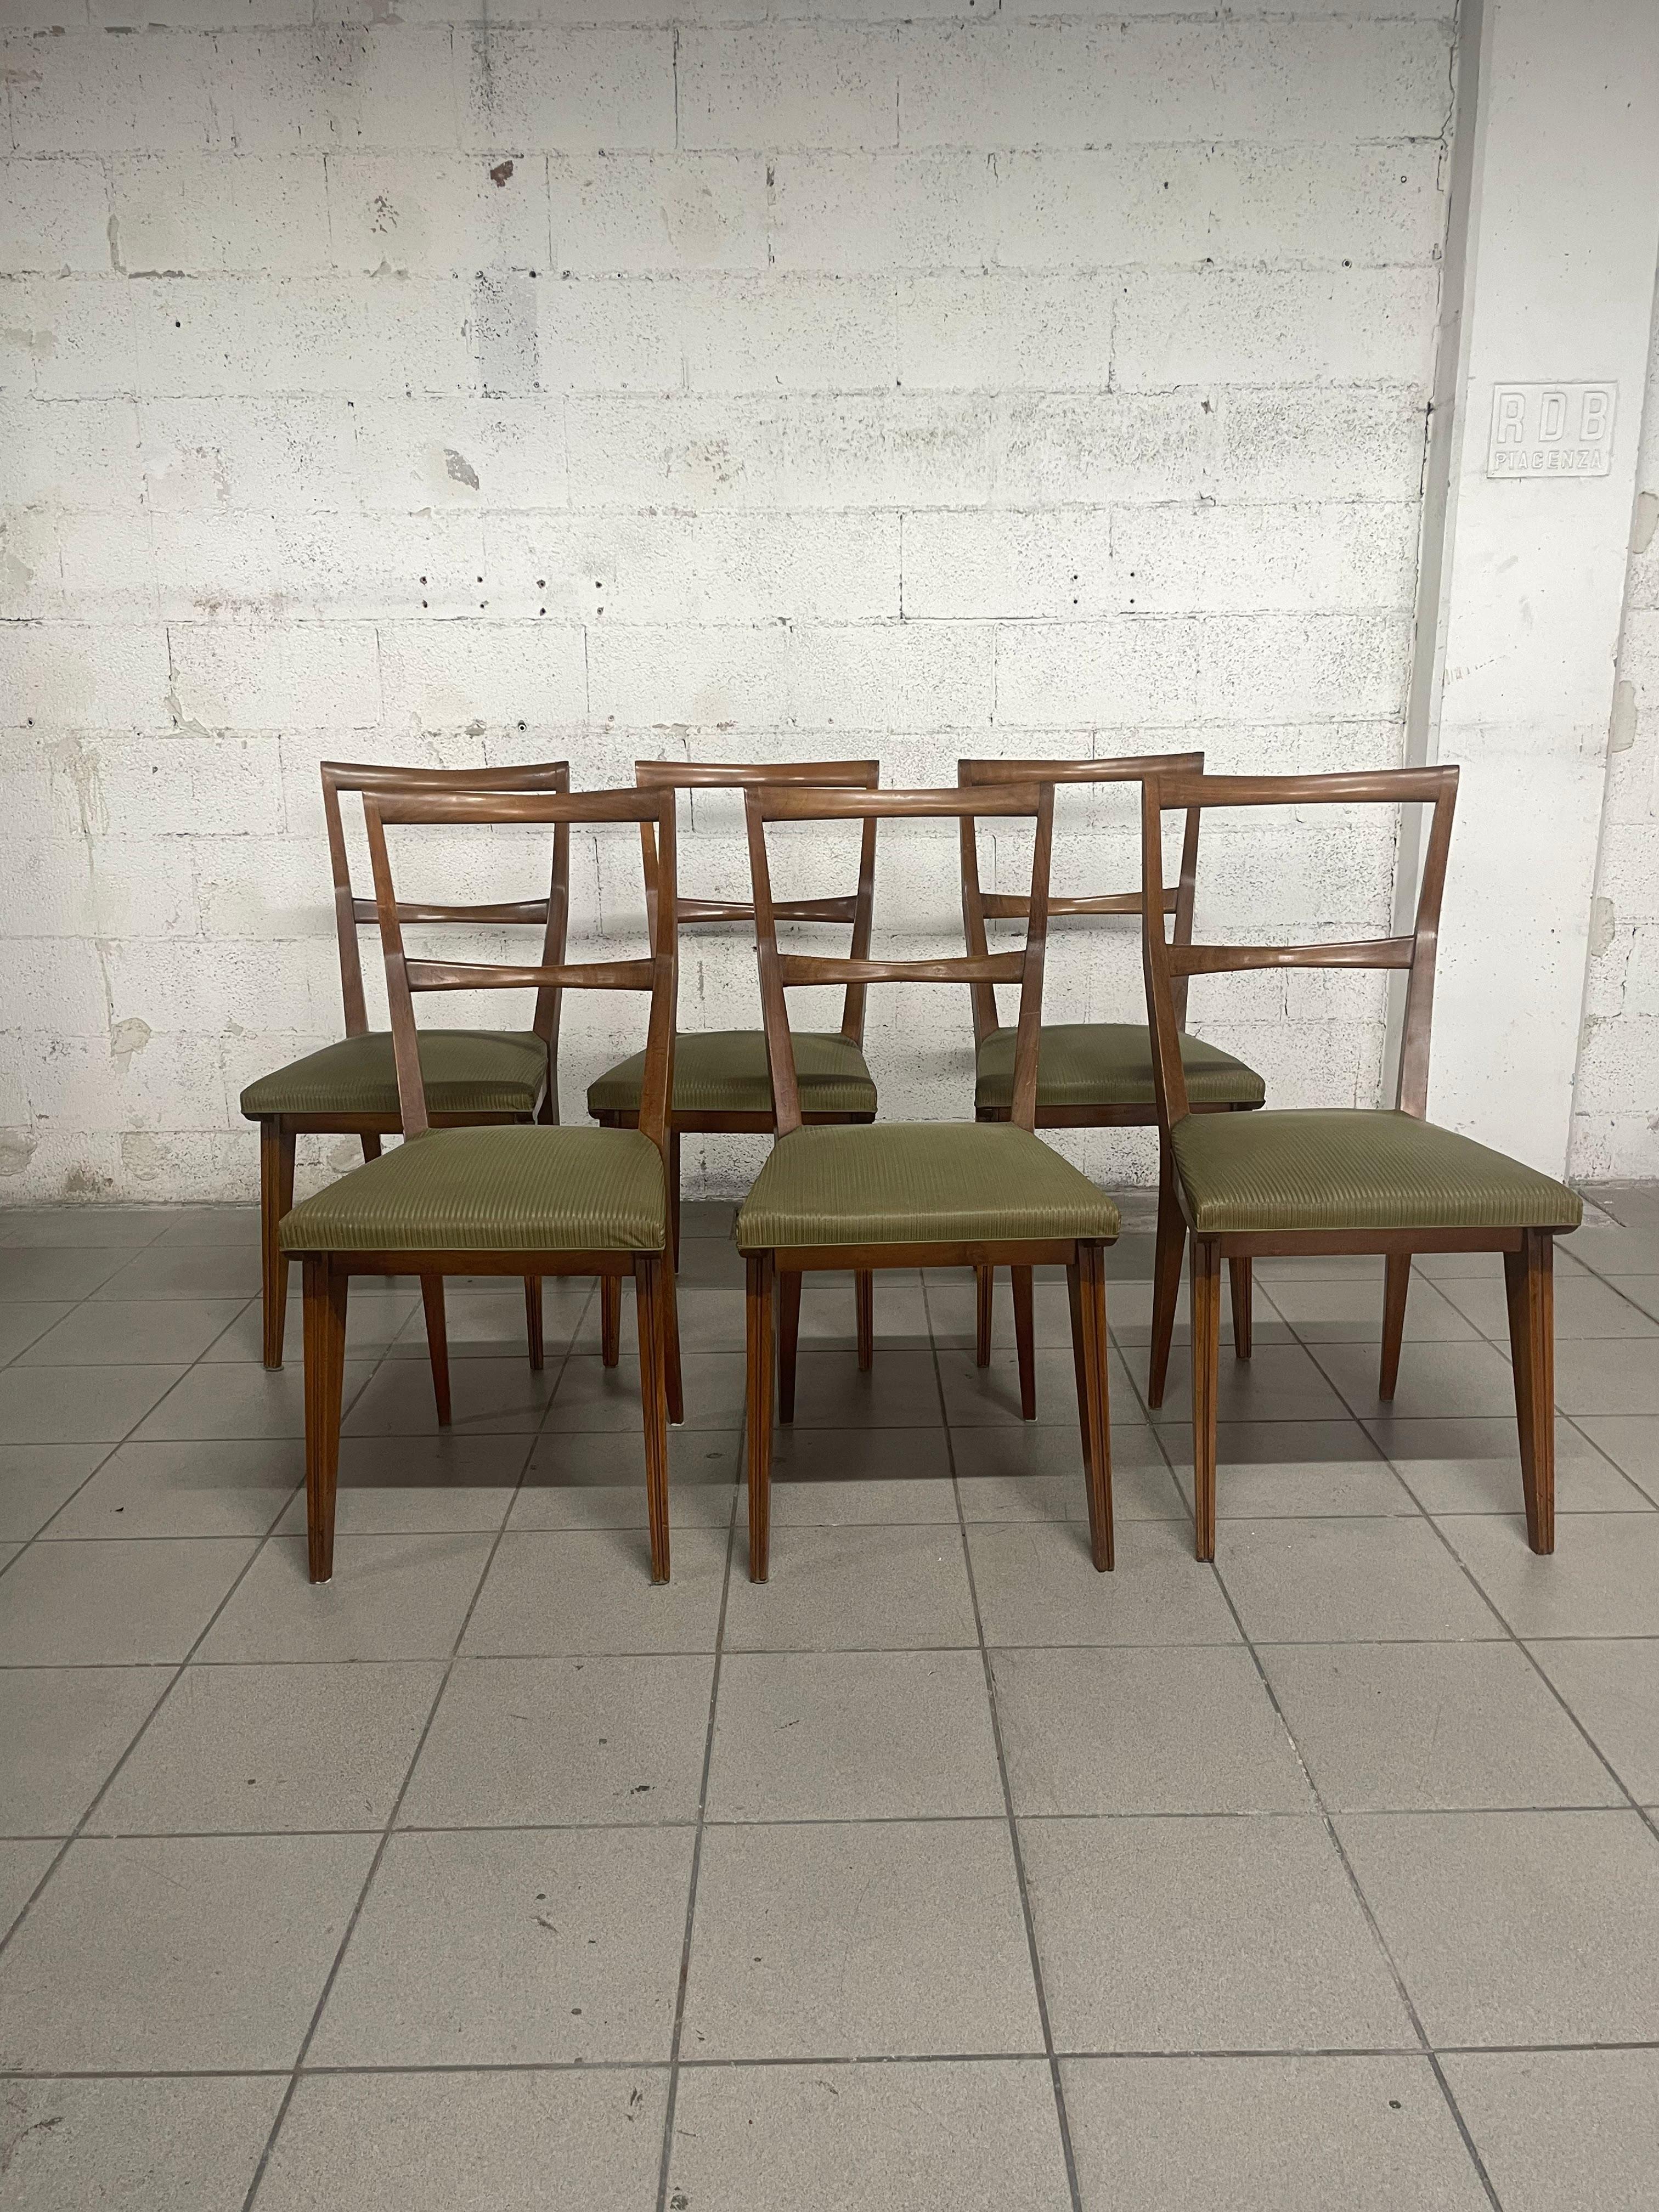 Mid-20th Century Set of 6 walnut chairs 1960s, Italian manufacture For Sale